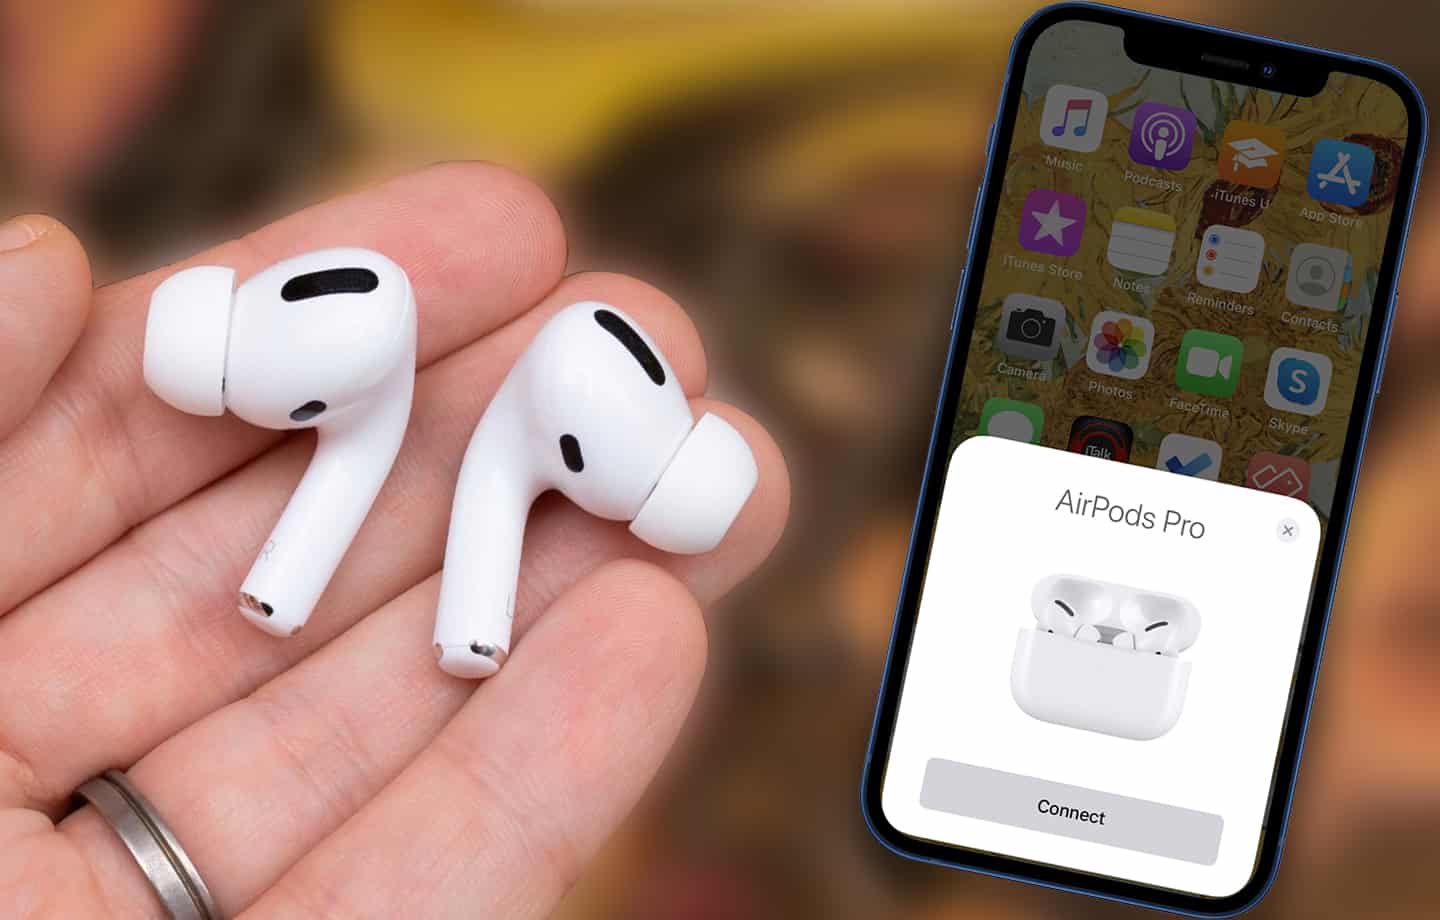 Airpods Connected But No Sound? Here Are 5 Ways to Fix